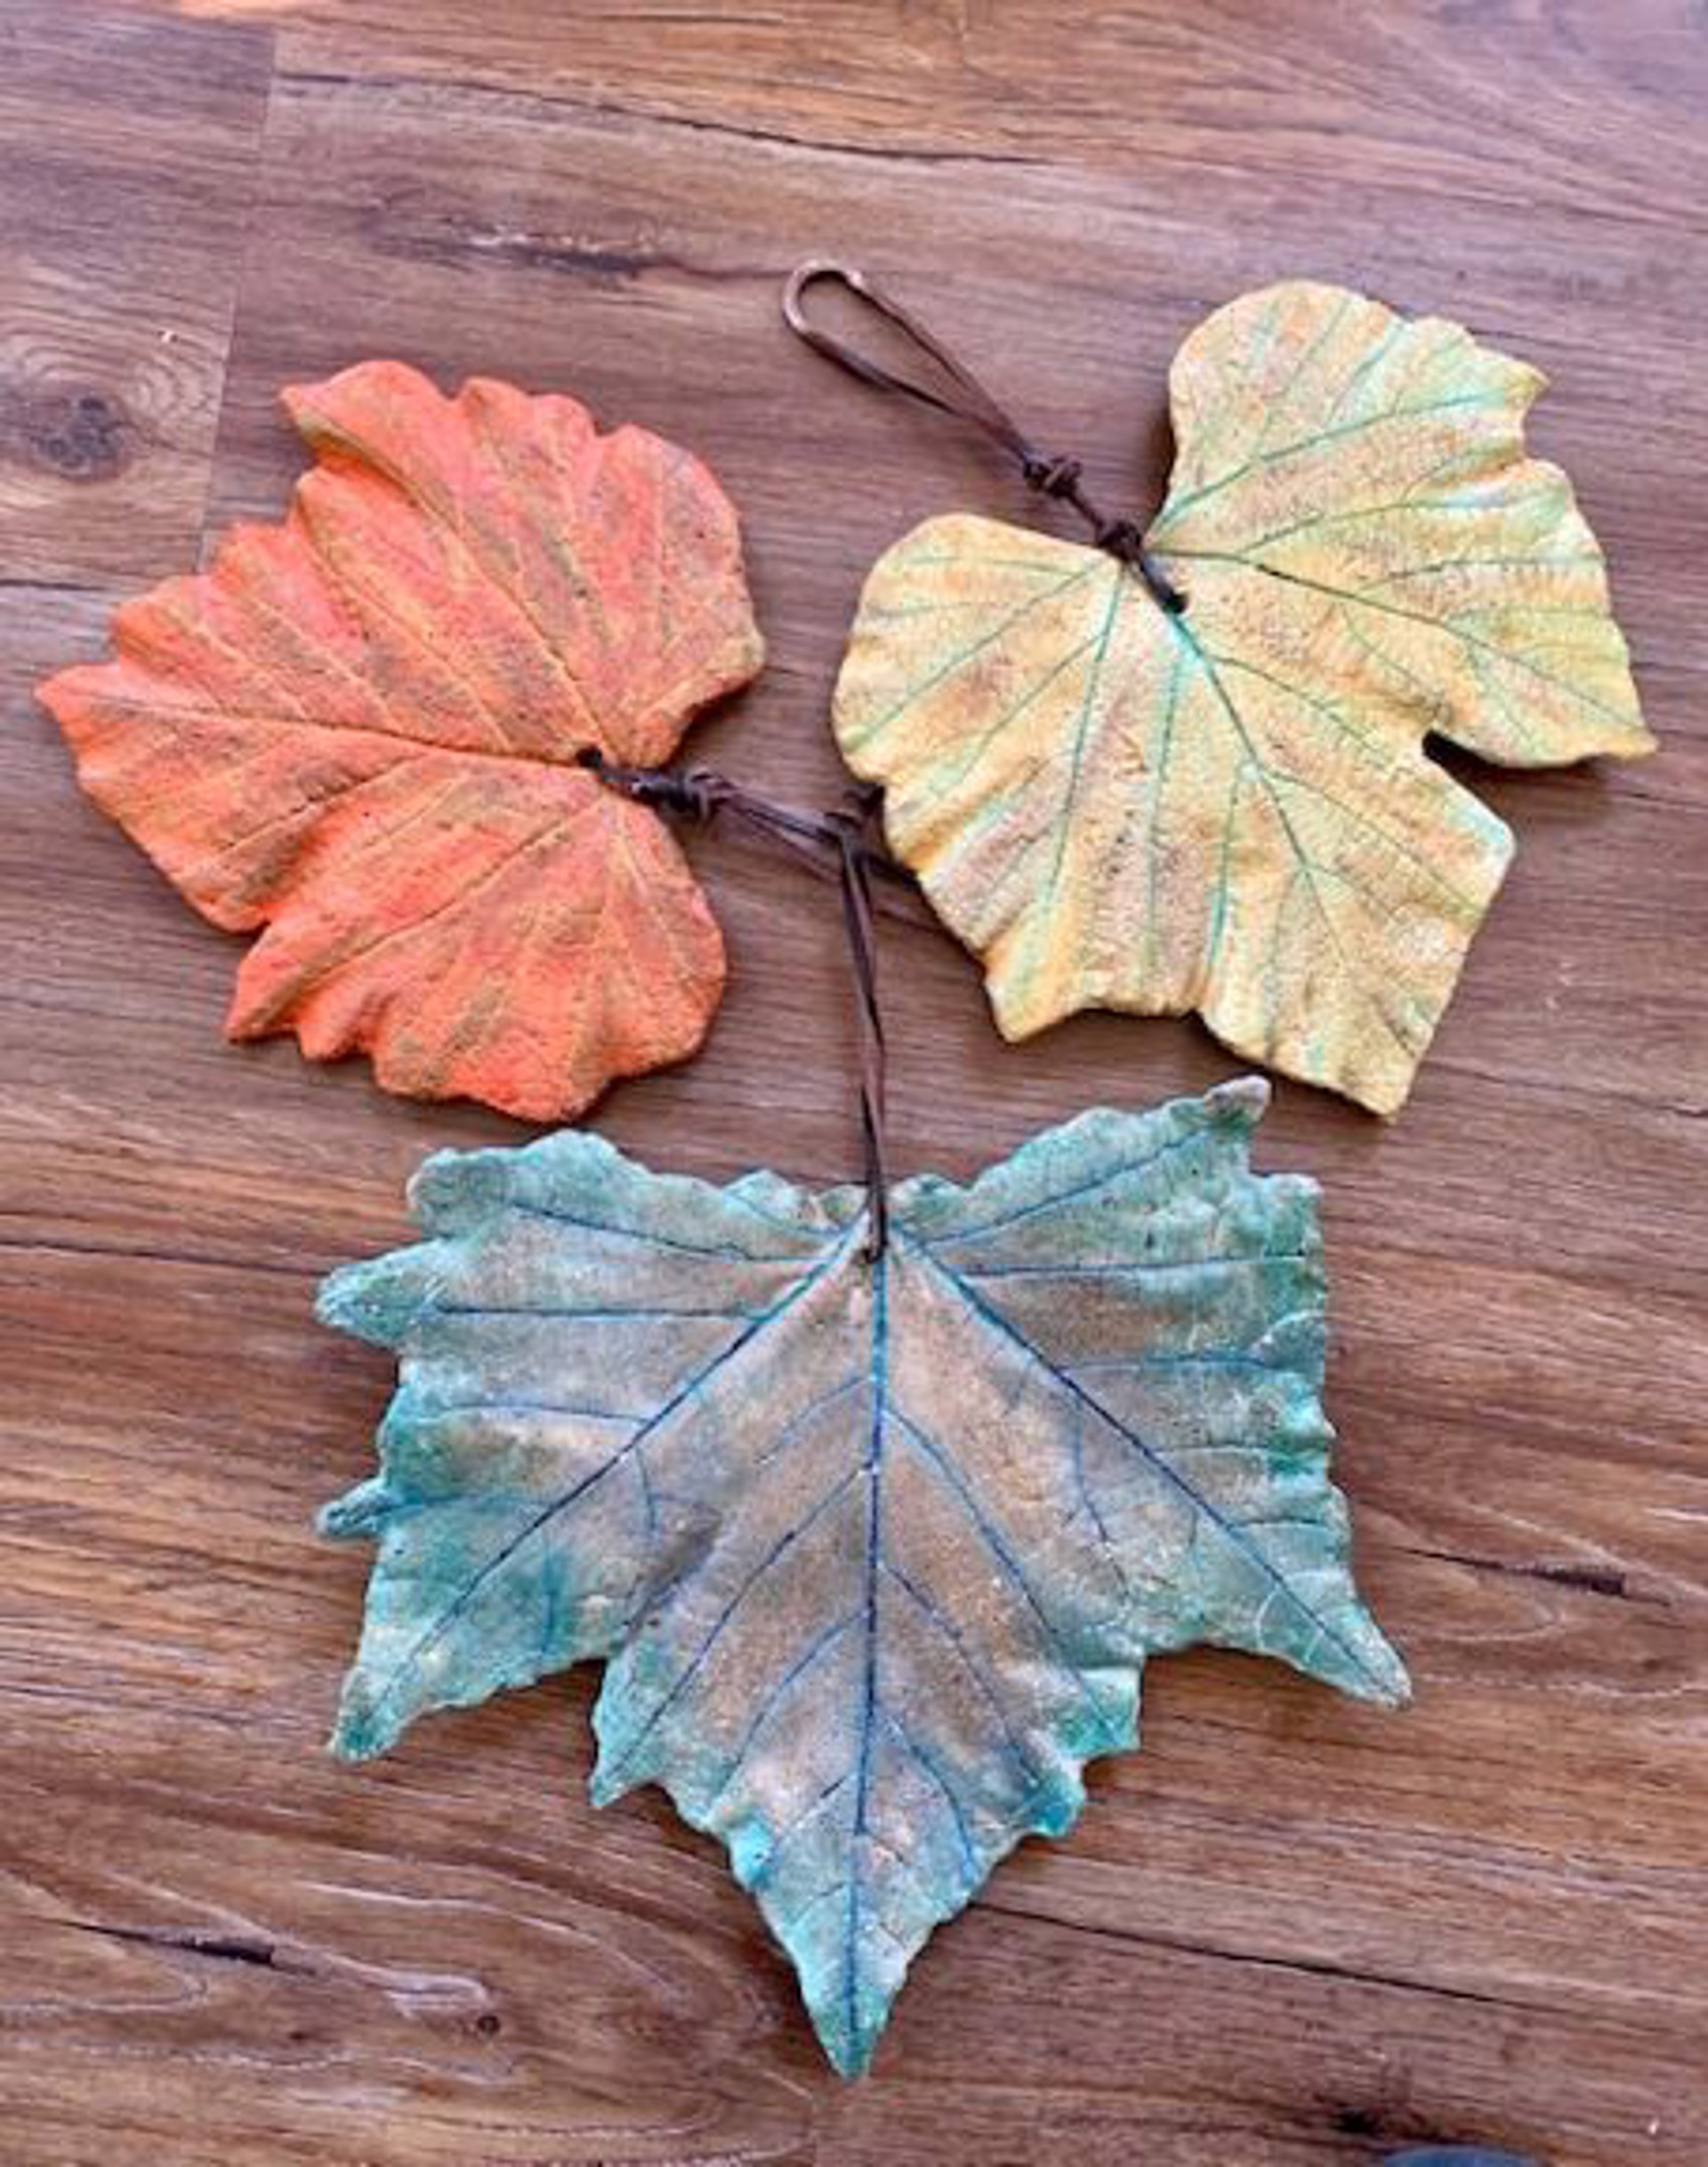 Trivets #20 - Sycamore/Grape Leaves by Pam O'Neall